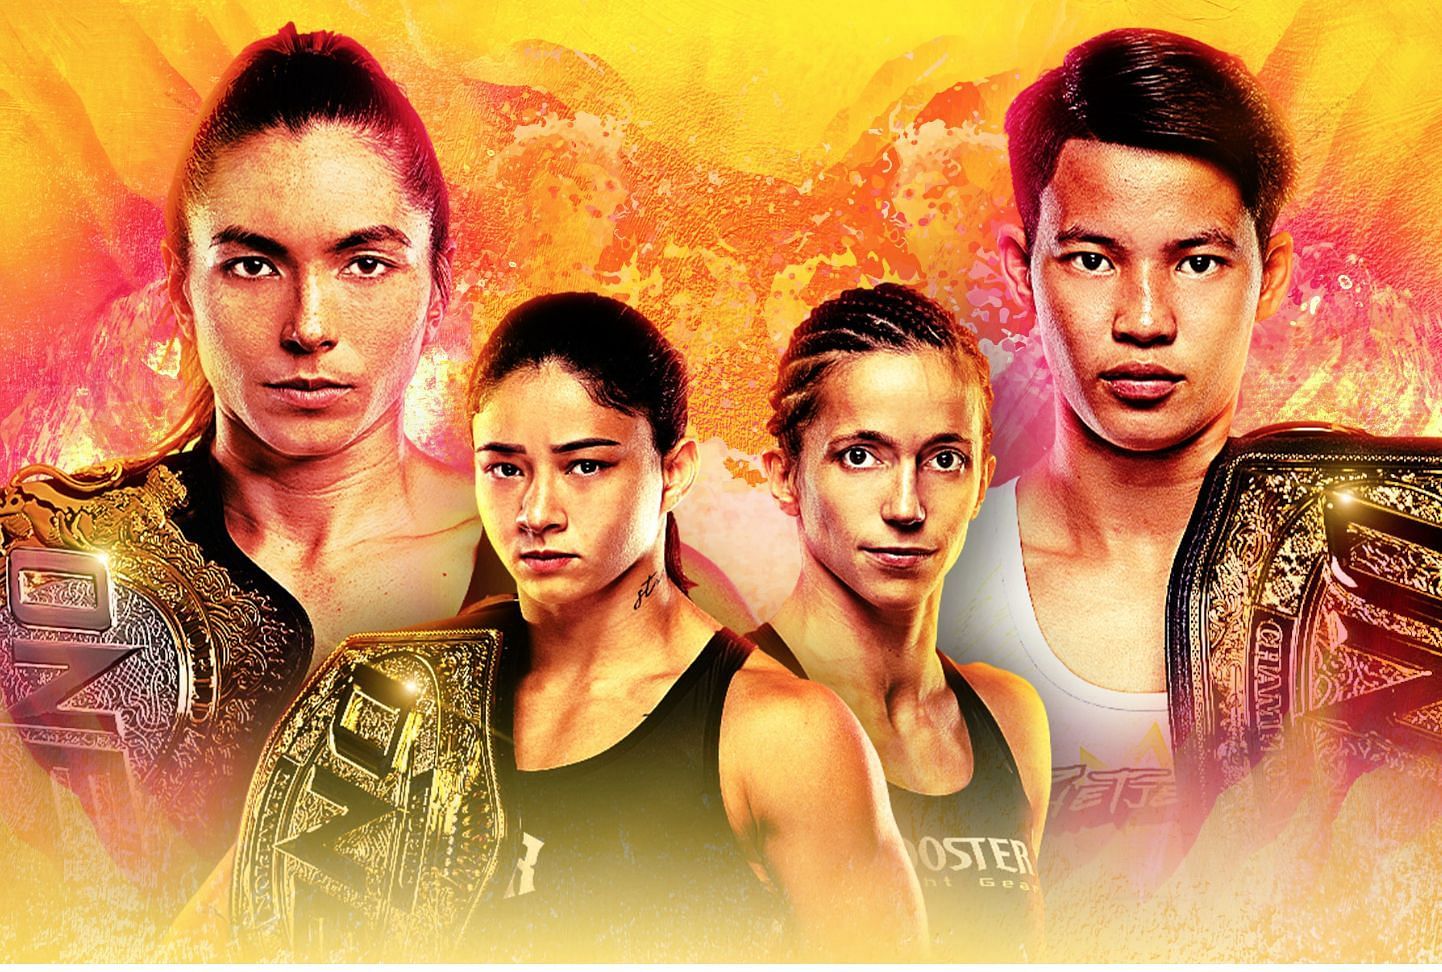 ONE Fight Night 20 | Image by ONE Championship